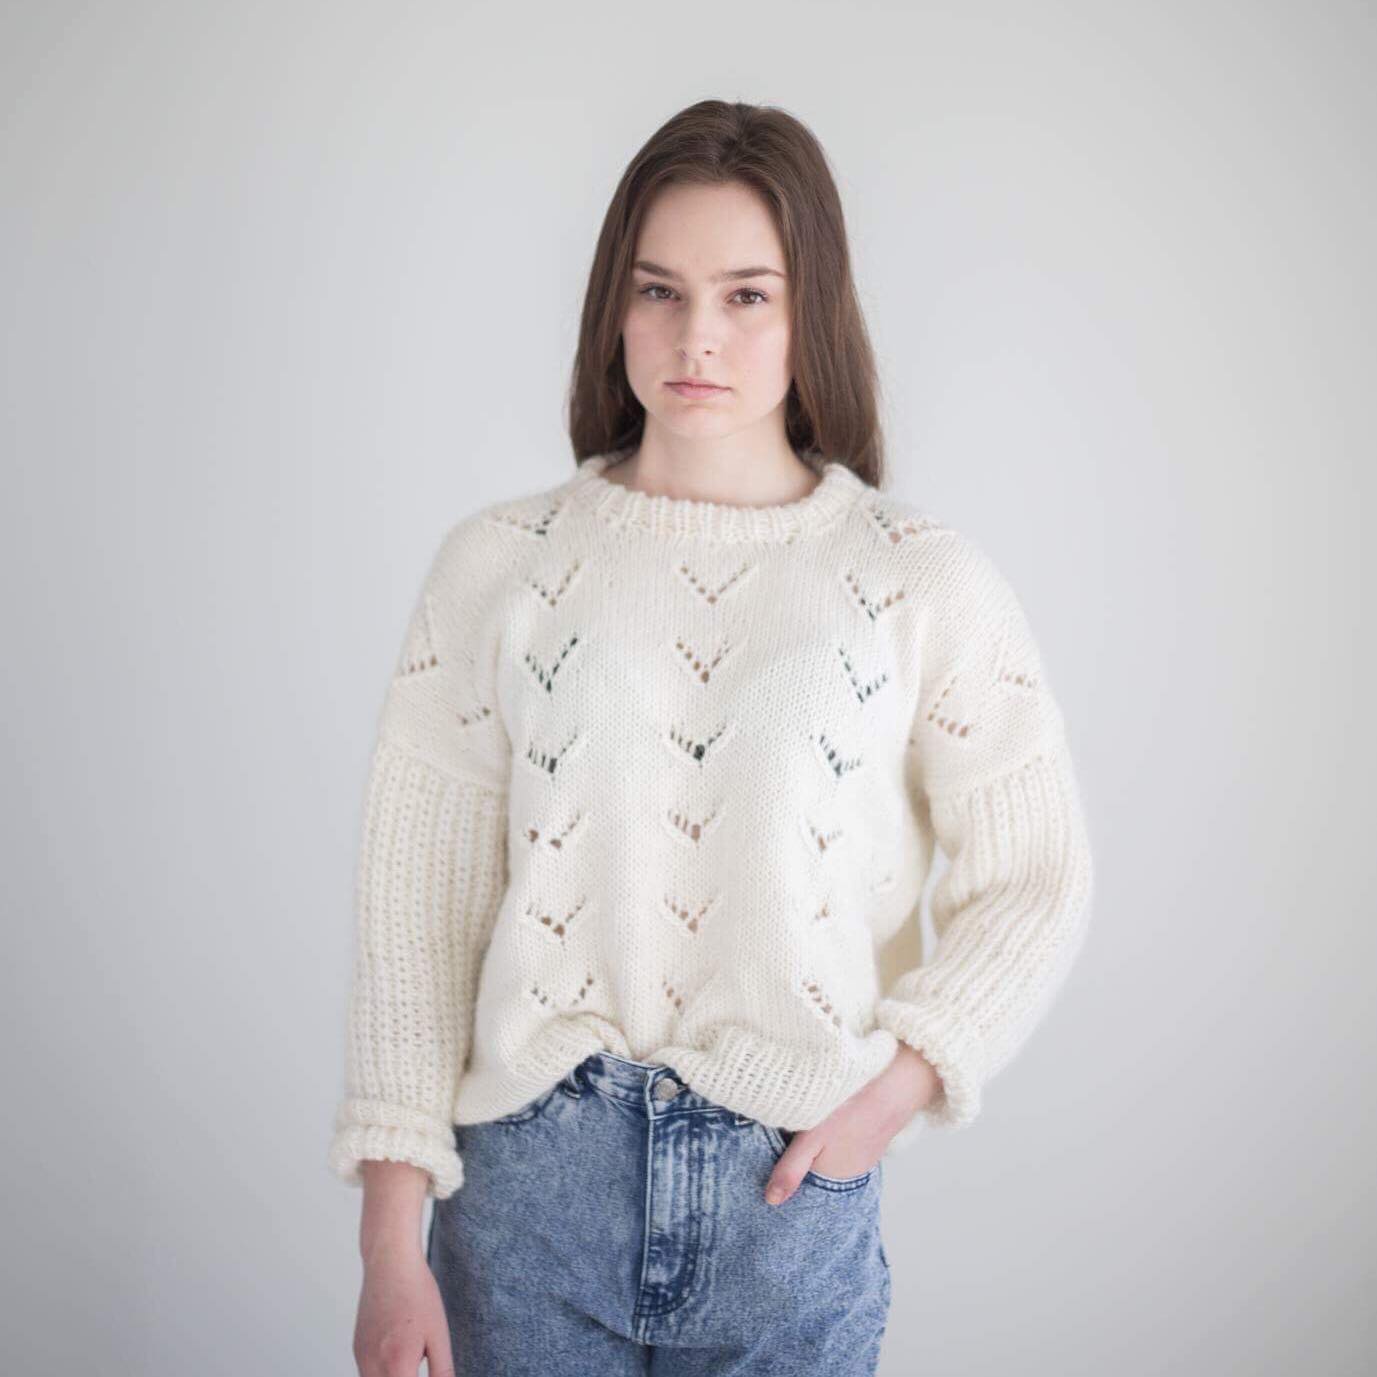  - Bloom Sweater | Eyelet pattern | Womens knitted sweater - by HipKnitShop - 03/04/2018